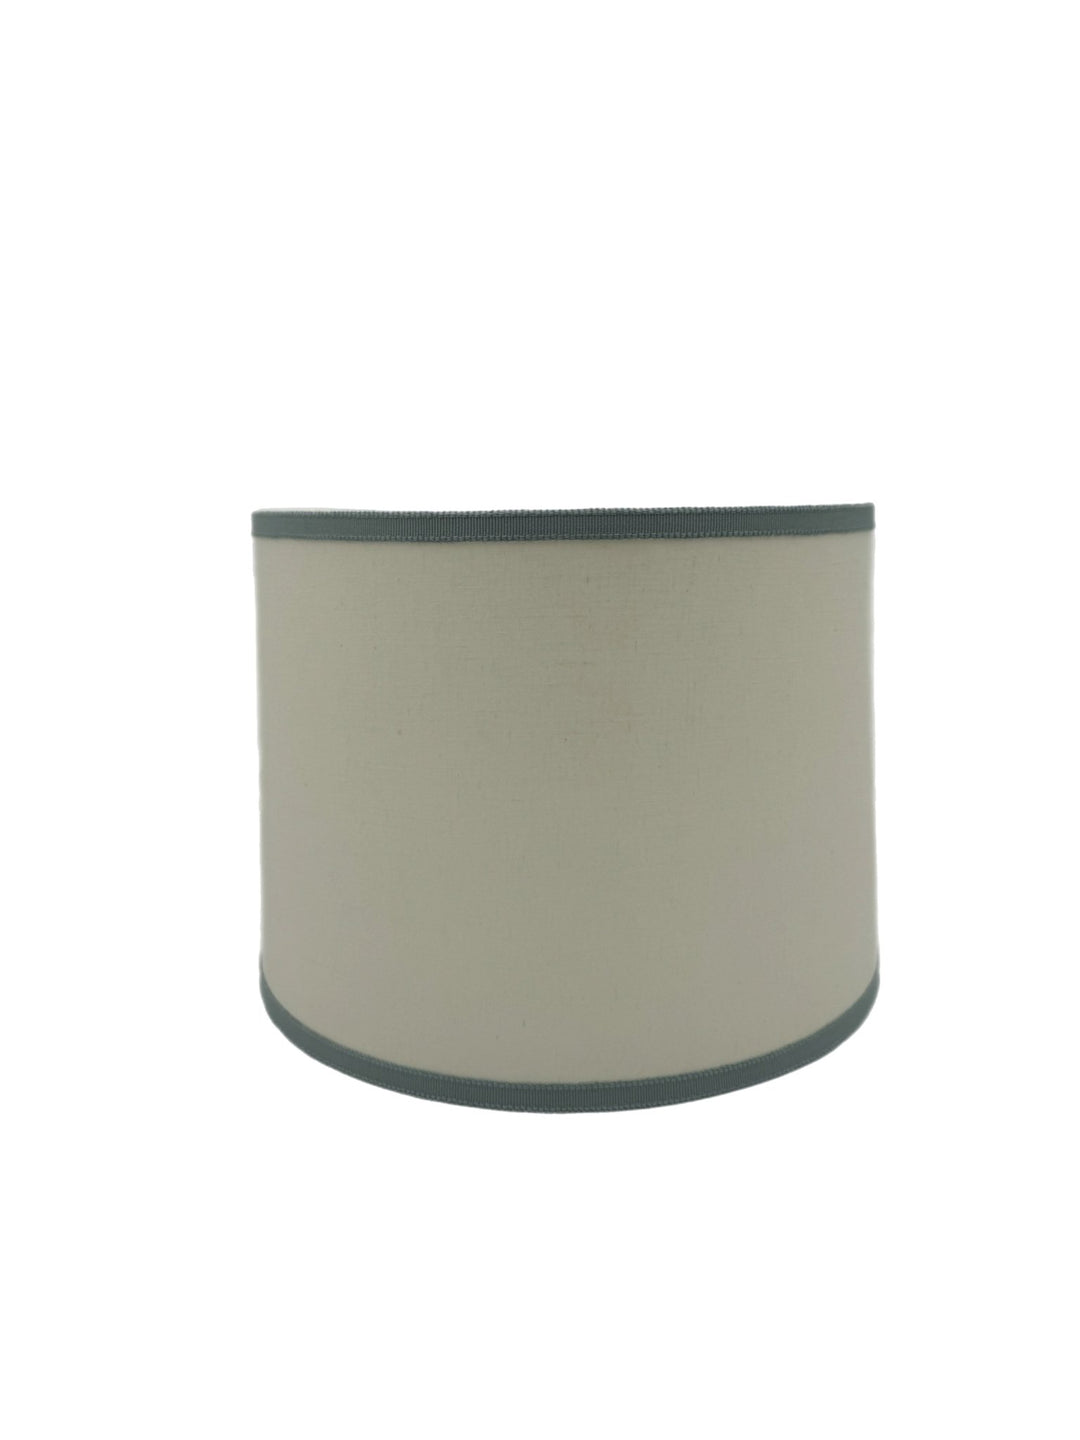 Linen Drum Harback Lamp Shade - Lux Lamp Shades